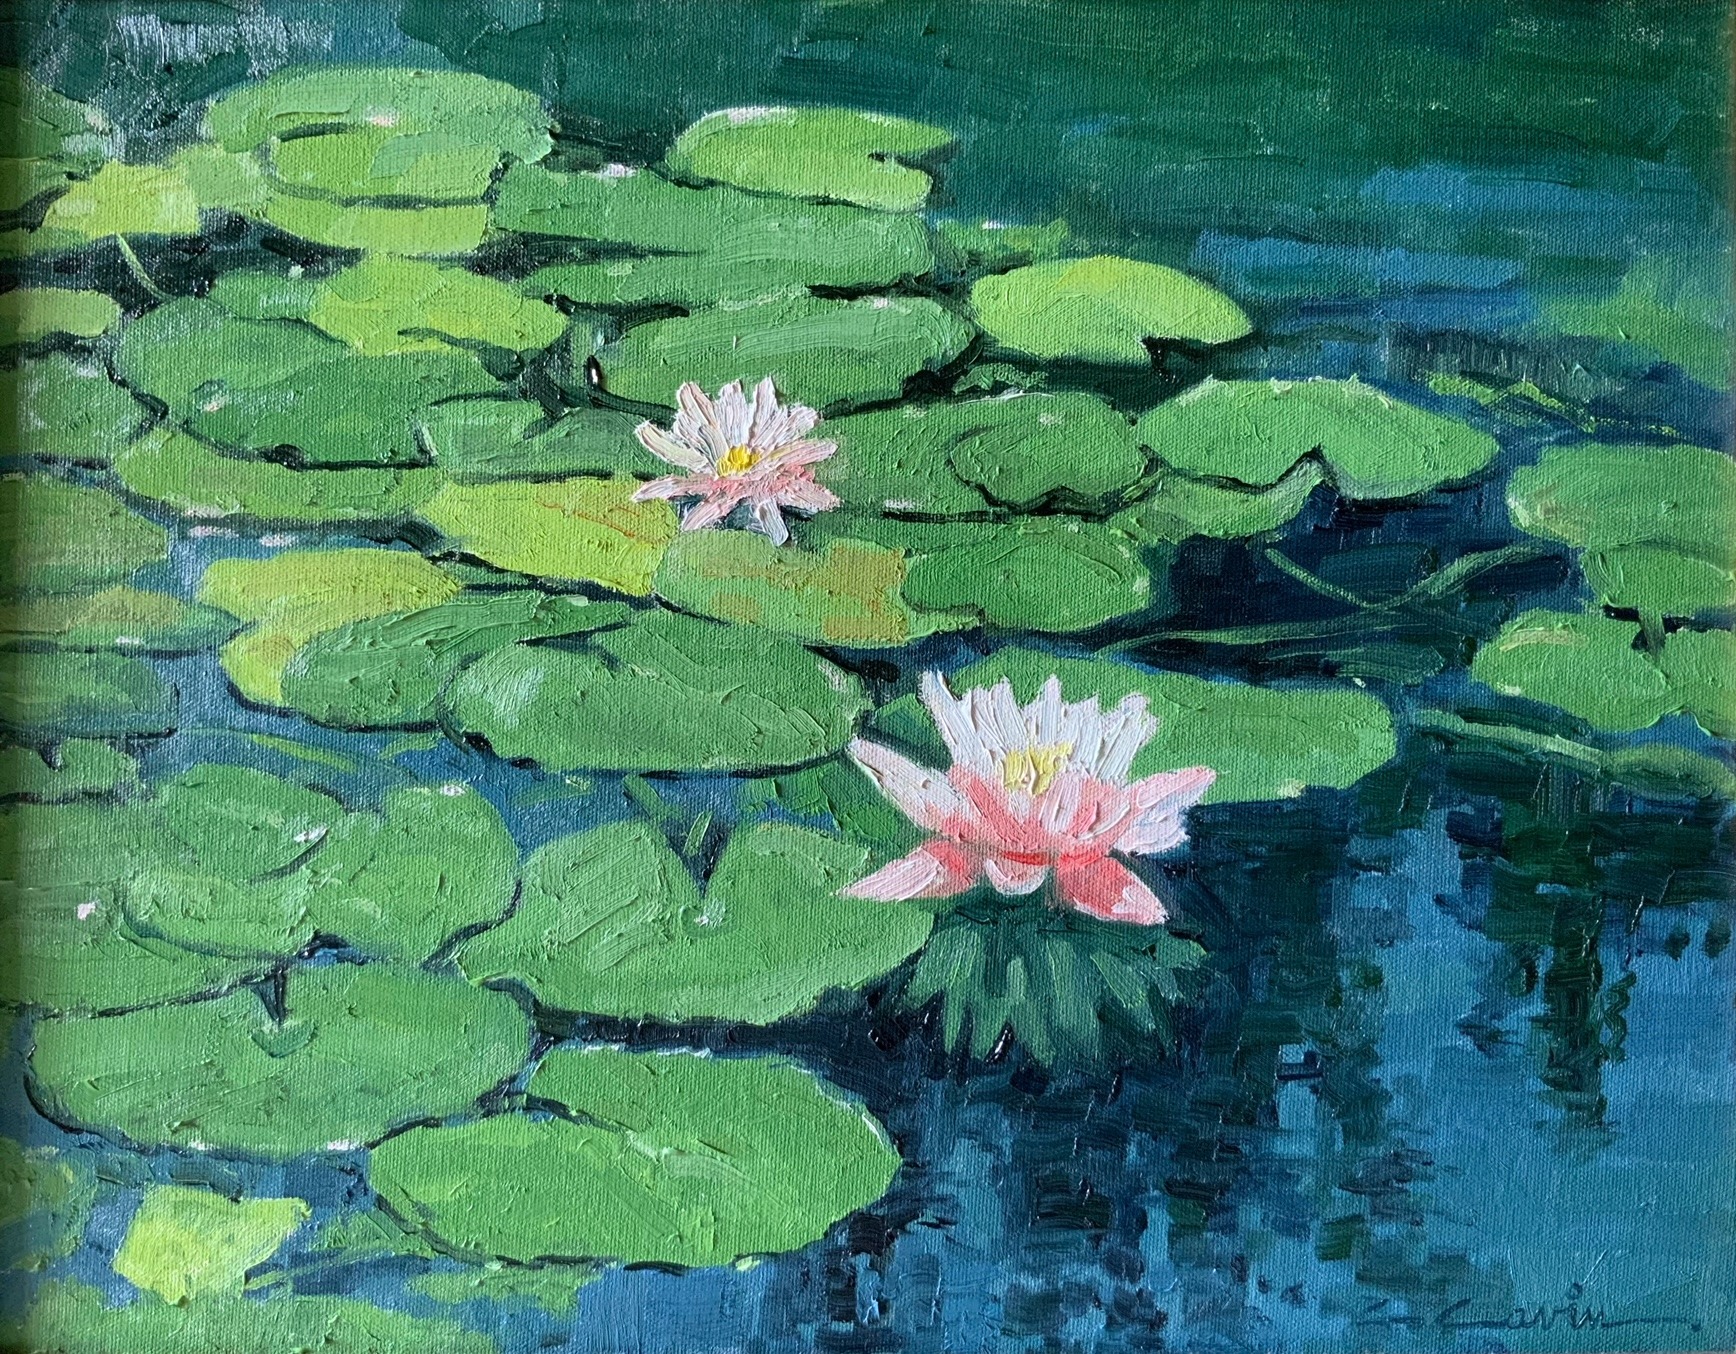 An oil painting, titled Riverwalk Lillies, by artist Cliff Cavin, depicting flowering water lillies on the San Antonio River Walk